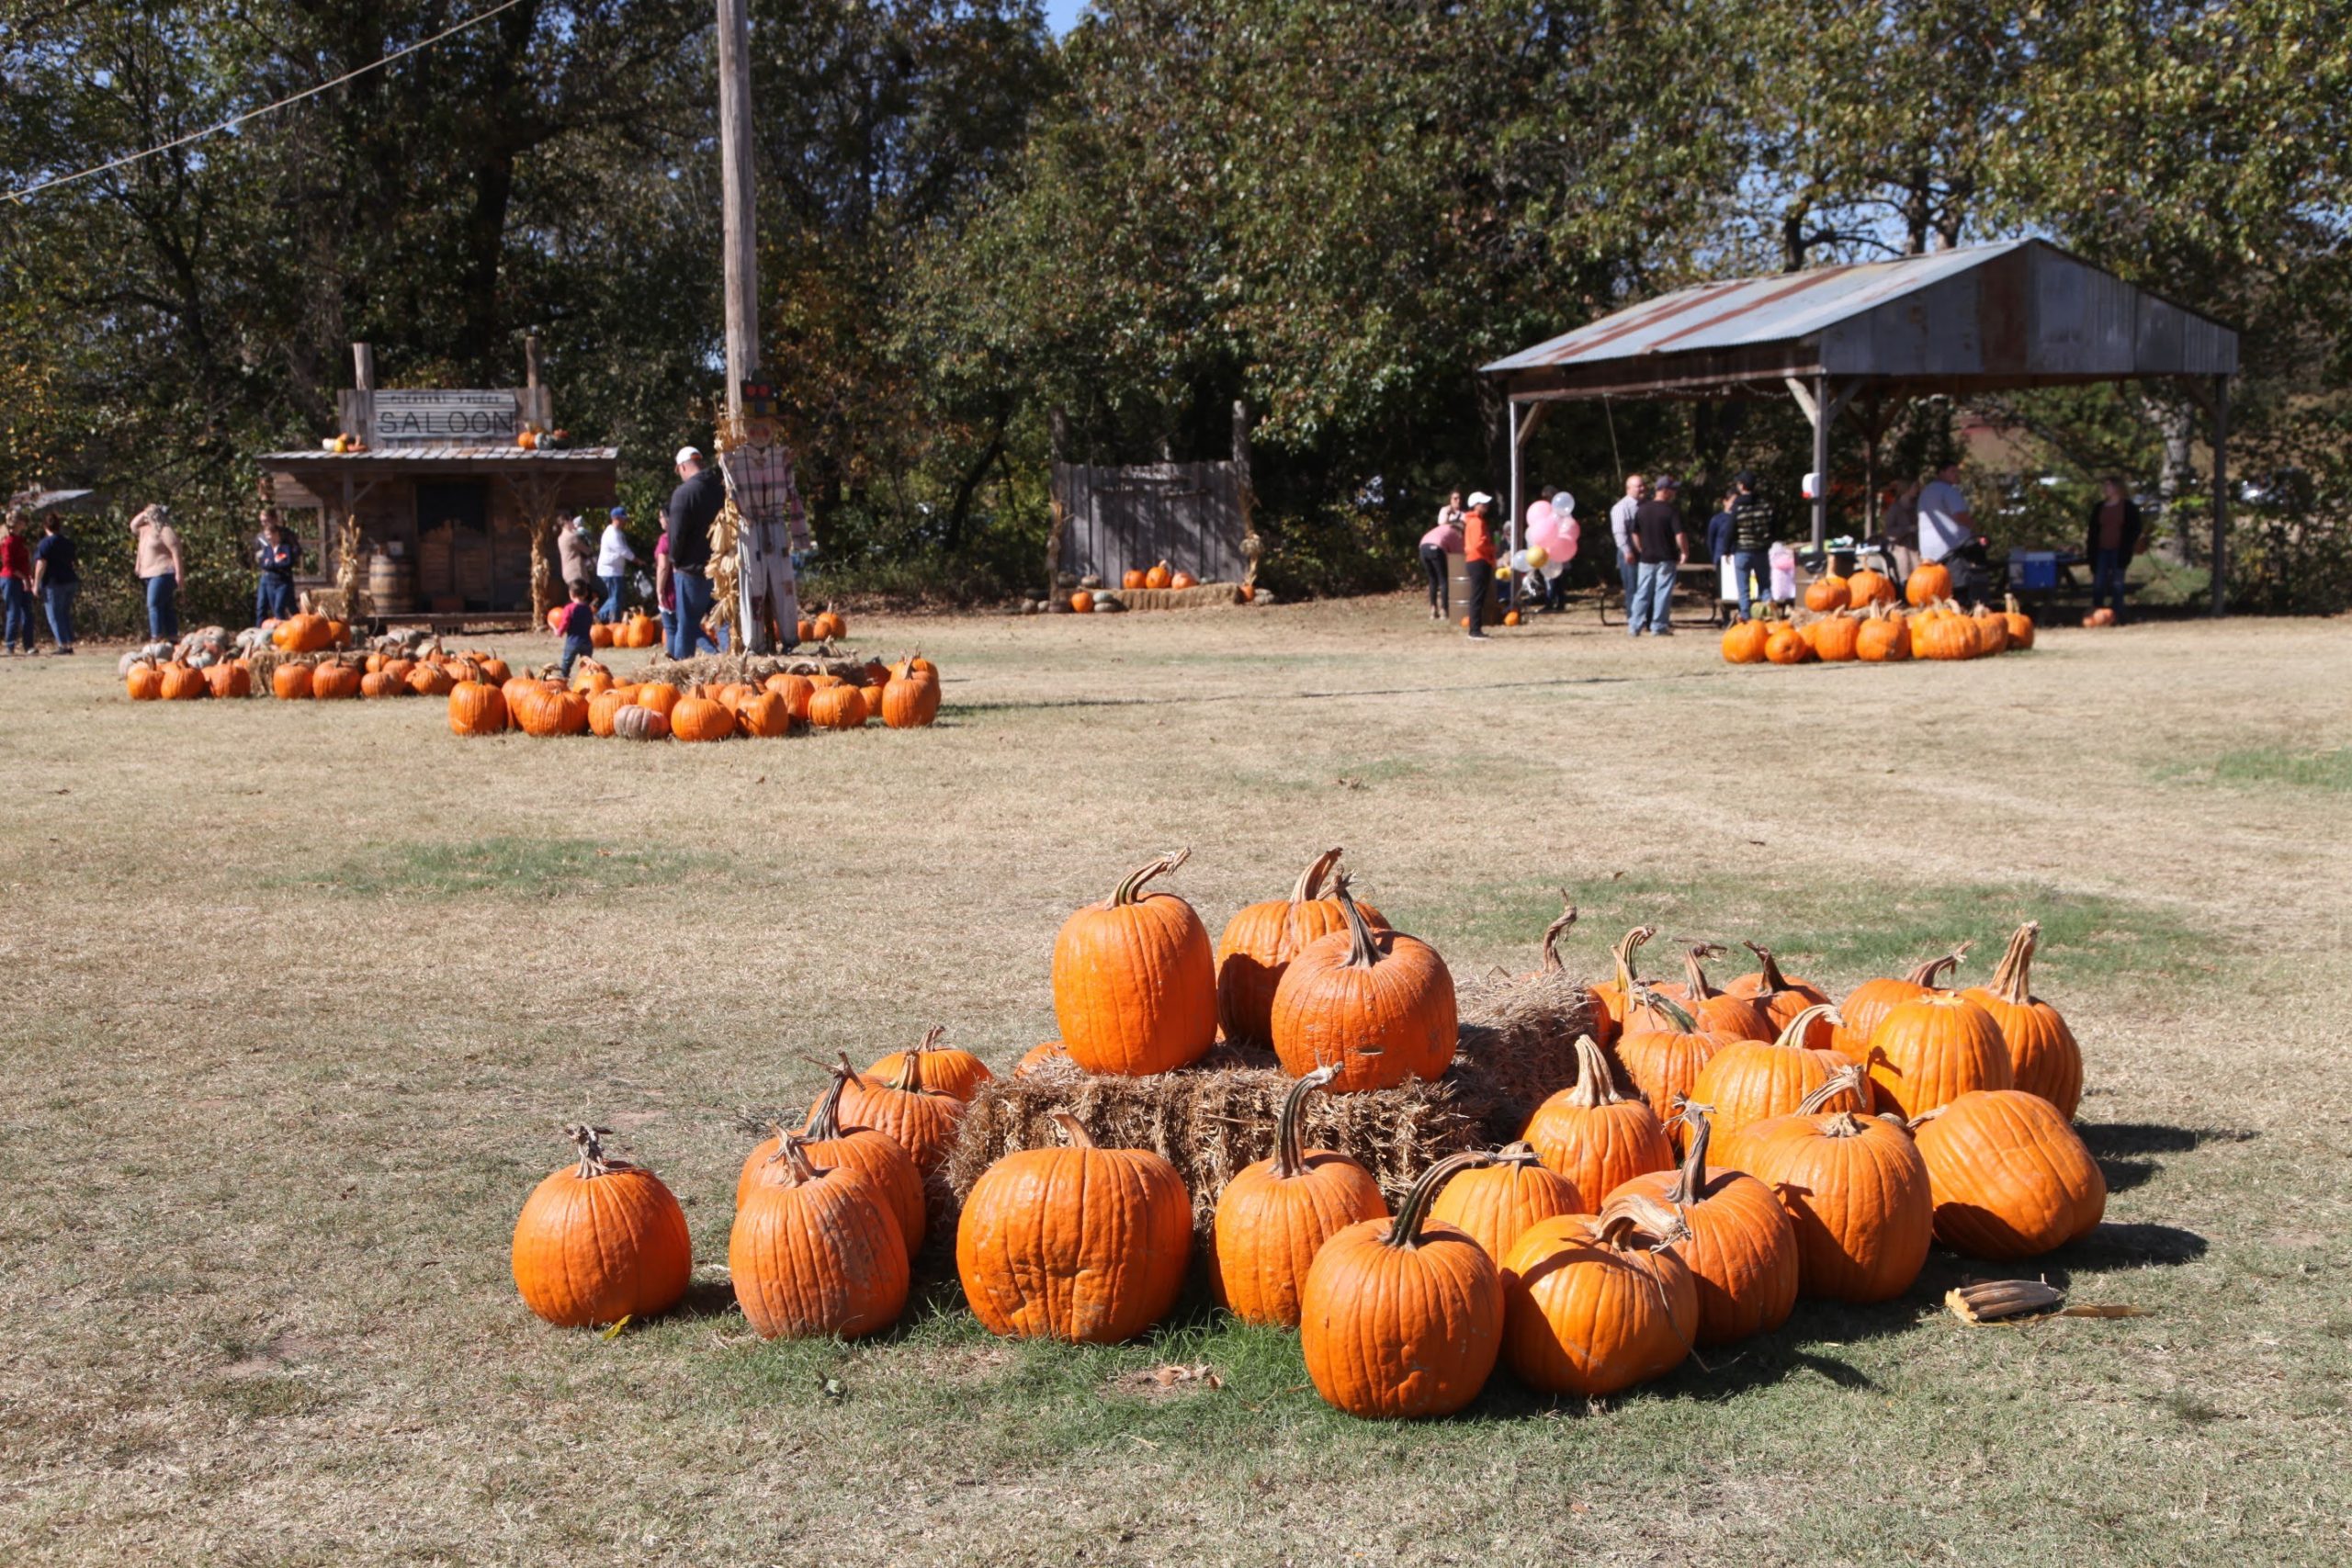 The Best Pumpkin Patches around the Tulsa area